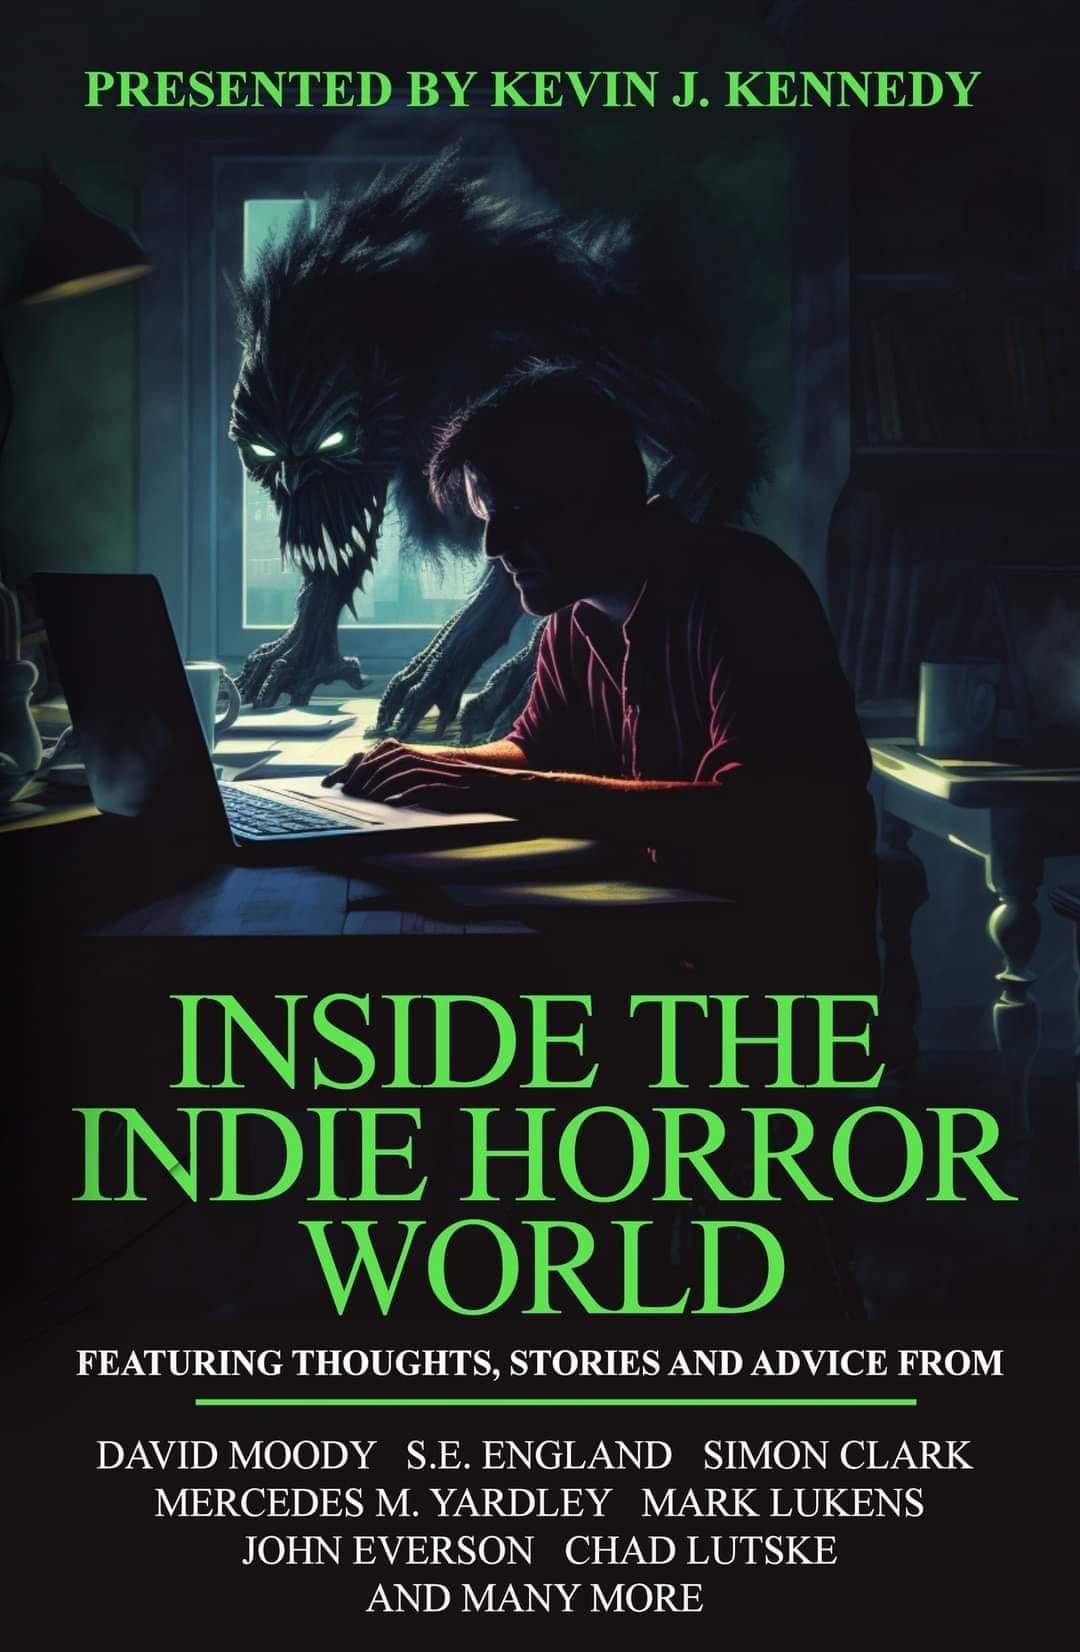 Inside the Indie Horror World is Free!